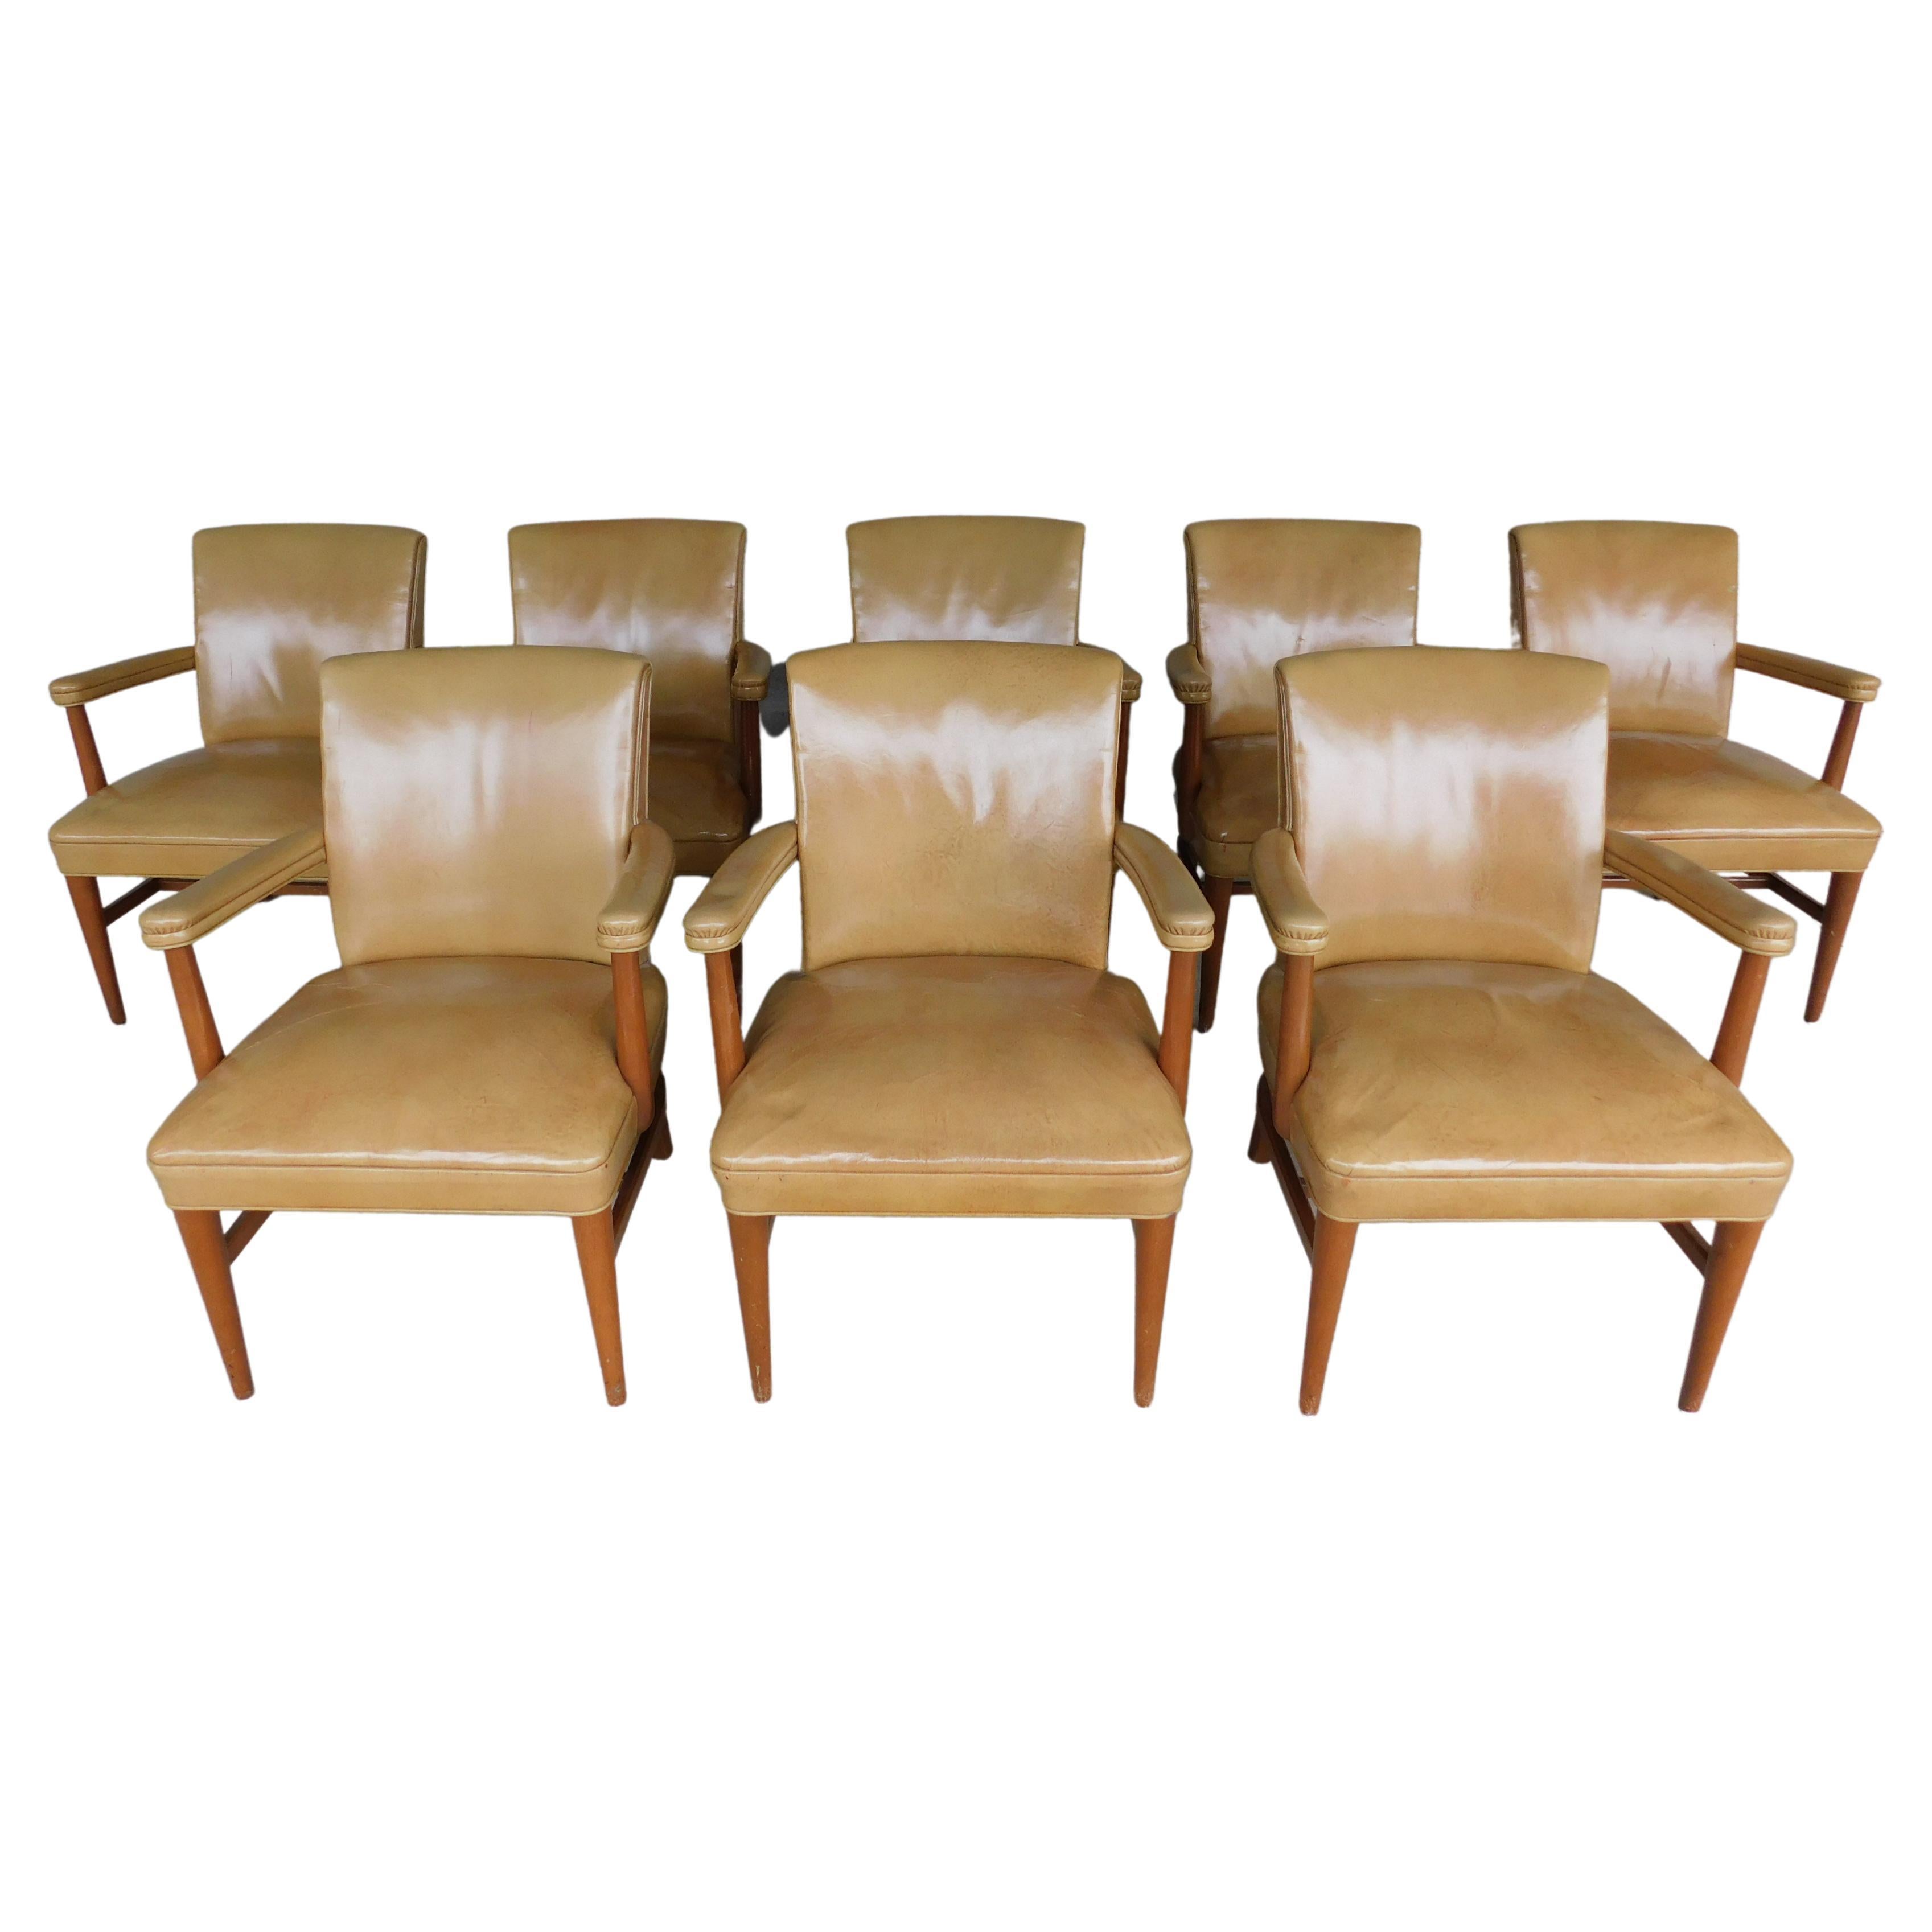 Vintage Mid-Century Modern Gunlocke Leather Conference Office Chairs Set of, 8